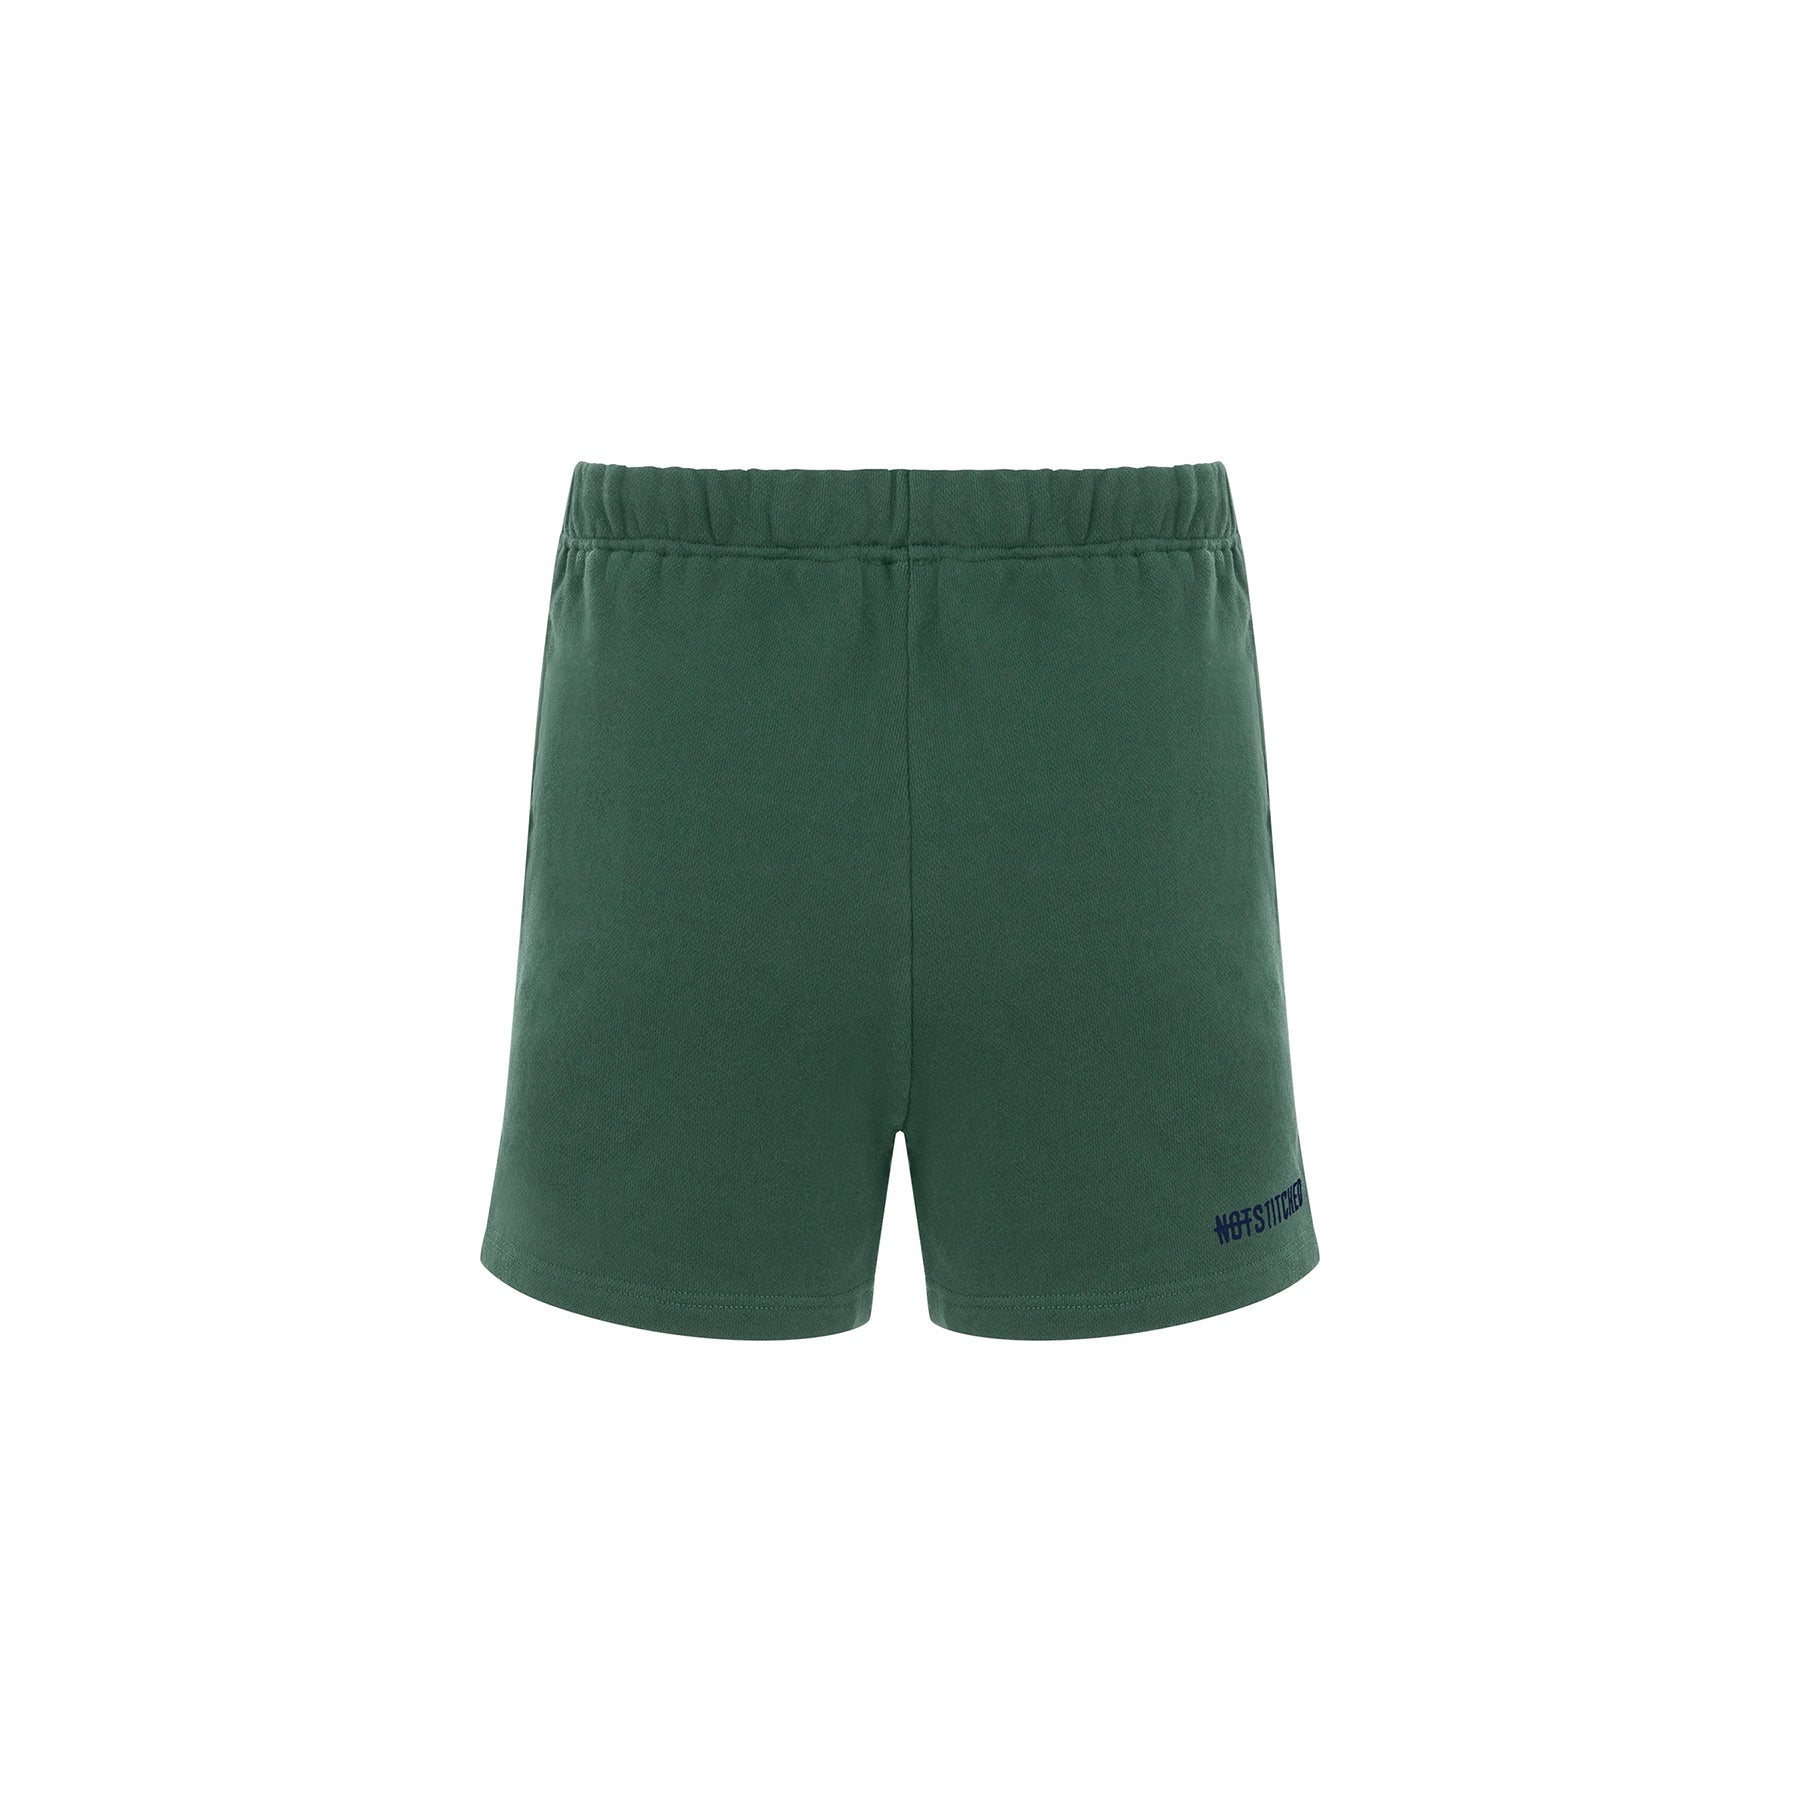 YOU French terry cotton shorts